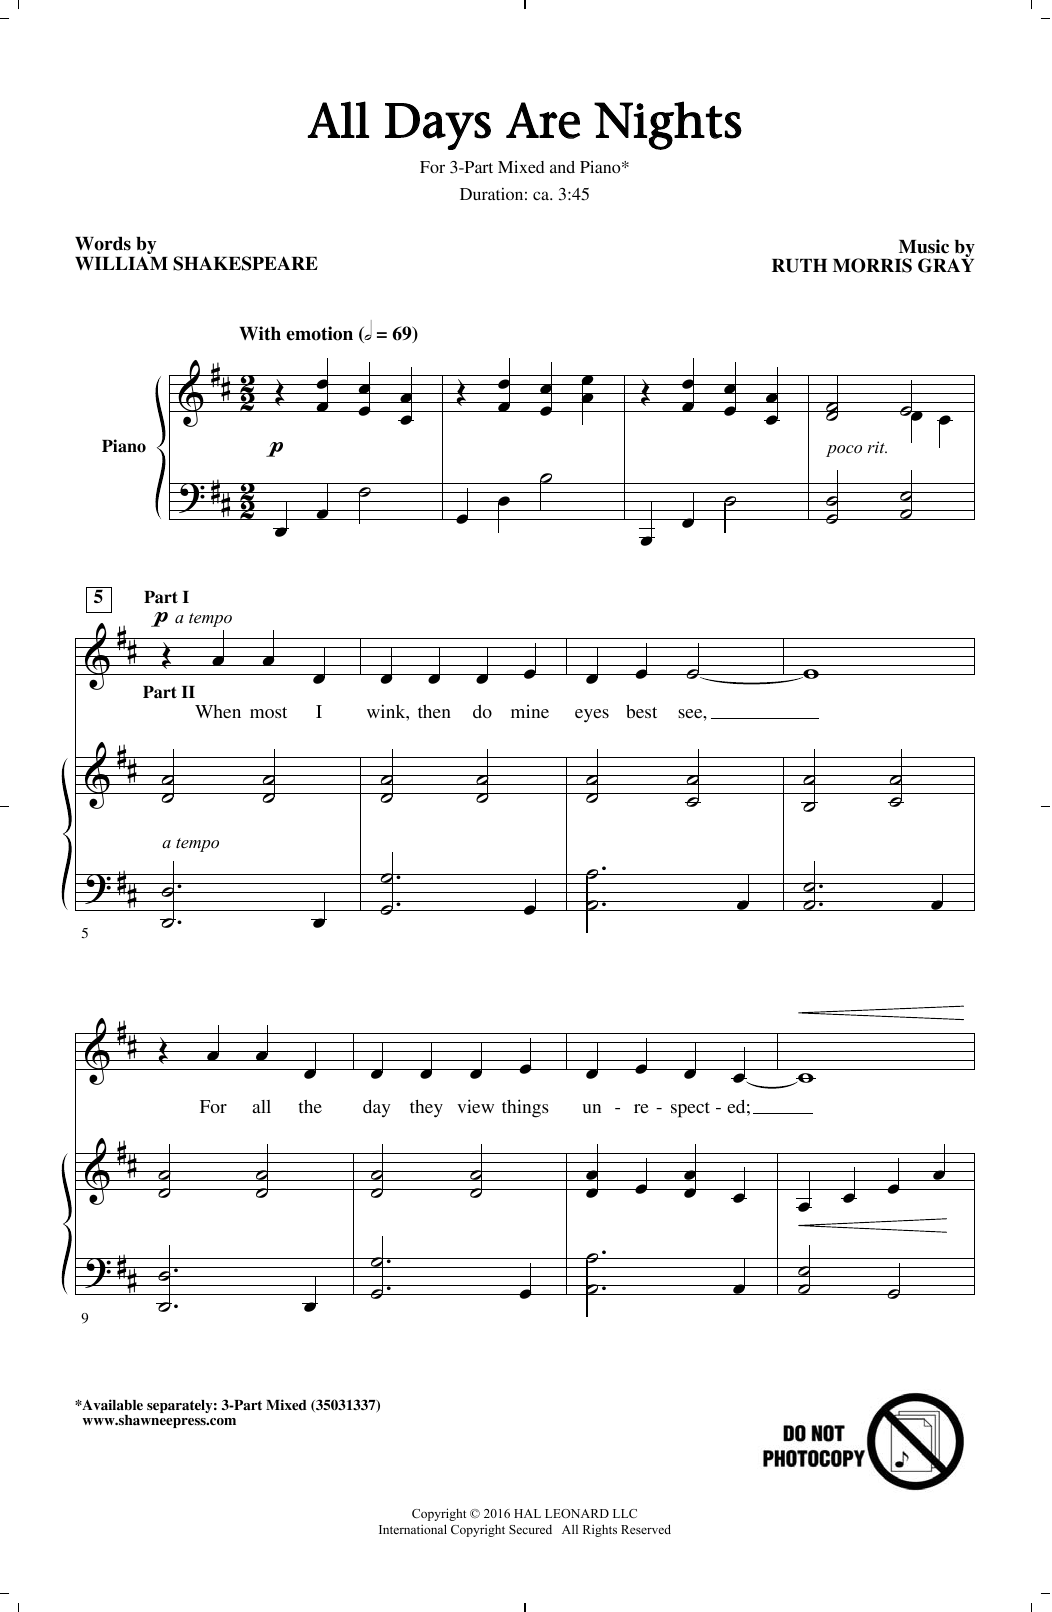 Ruth Morris Gray All Days Are Nights sheet music notes and chords. Download Printable PDF.